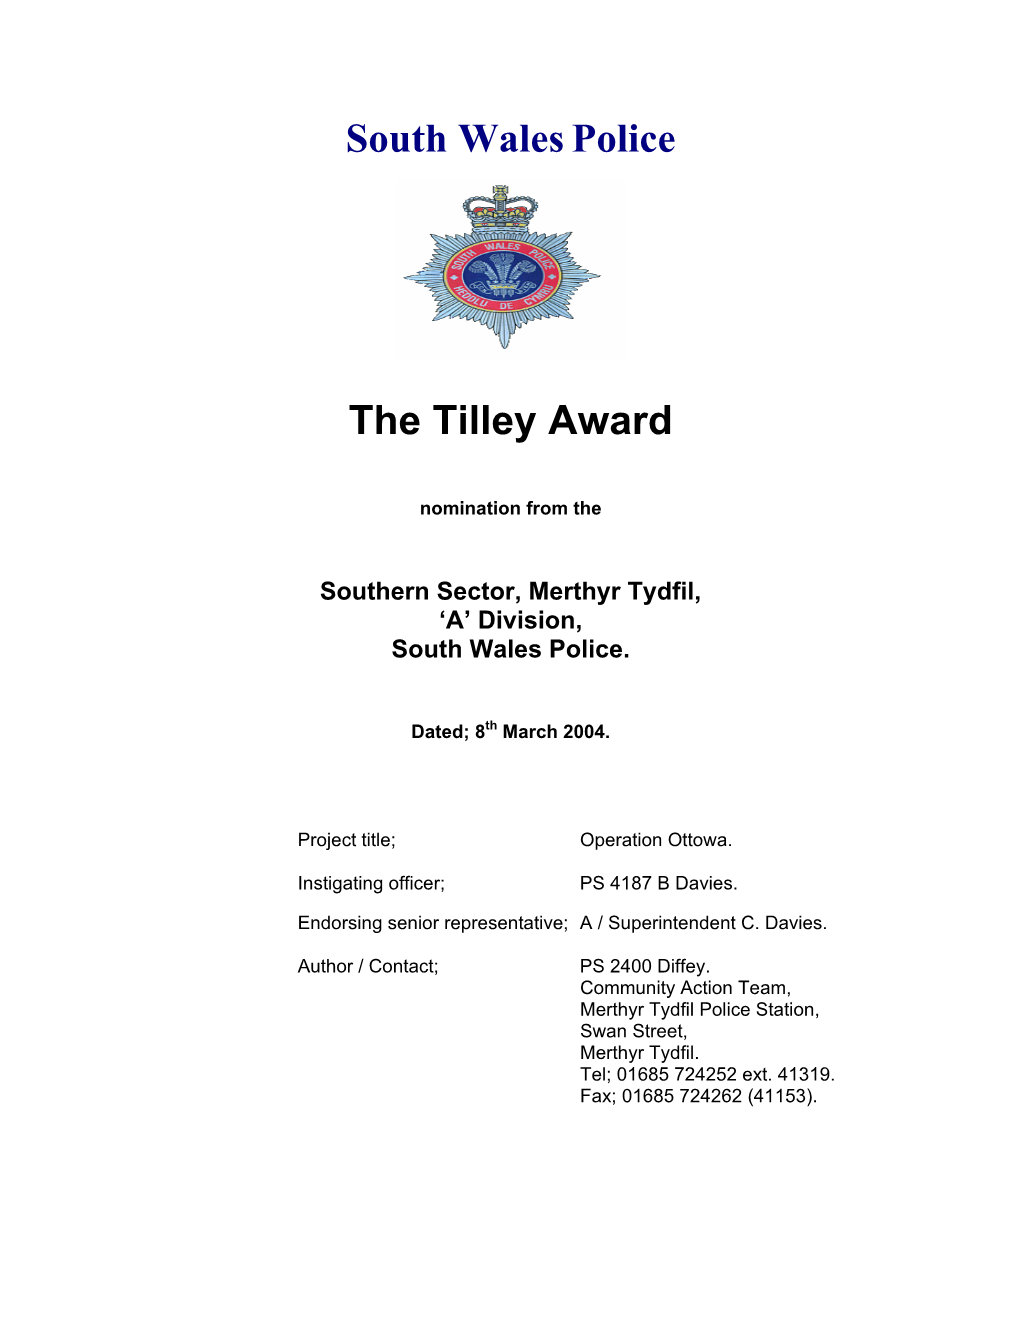 South Wales Police the Tilley Award